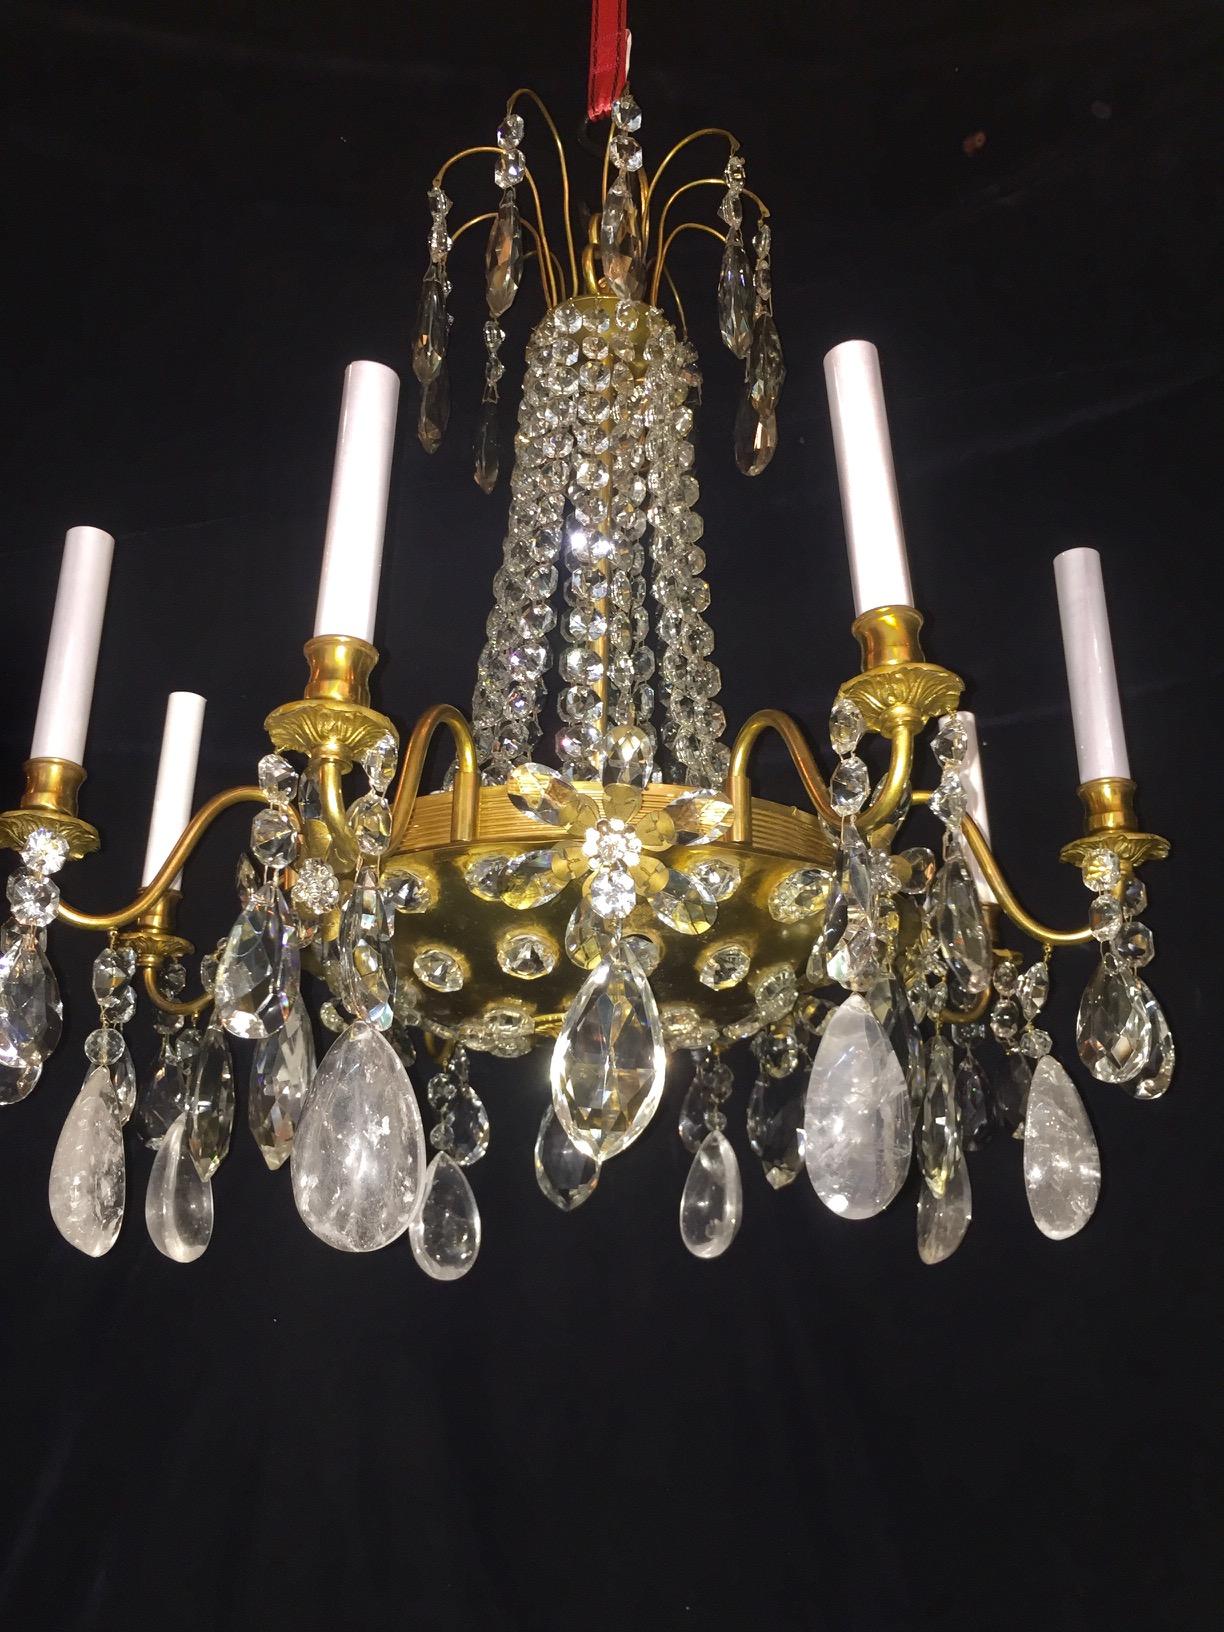 A pair of unusual antique French multi light gilt bronze, cut rock crystal and crystal chandeliers of fine detail embellished with rock crystal prisms, large crystal flowers and cut crystal chains further adorned with a central gilt bronze dish in